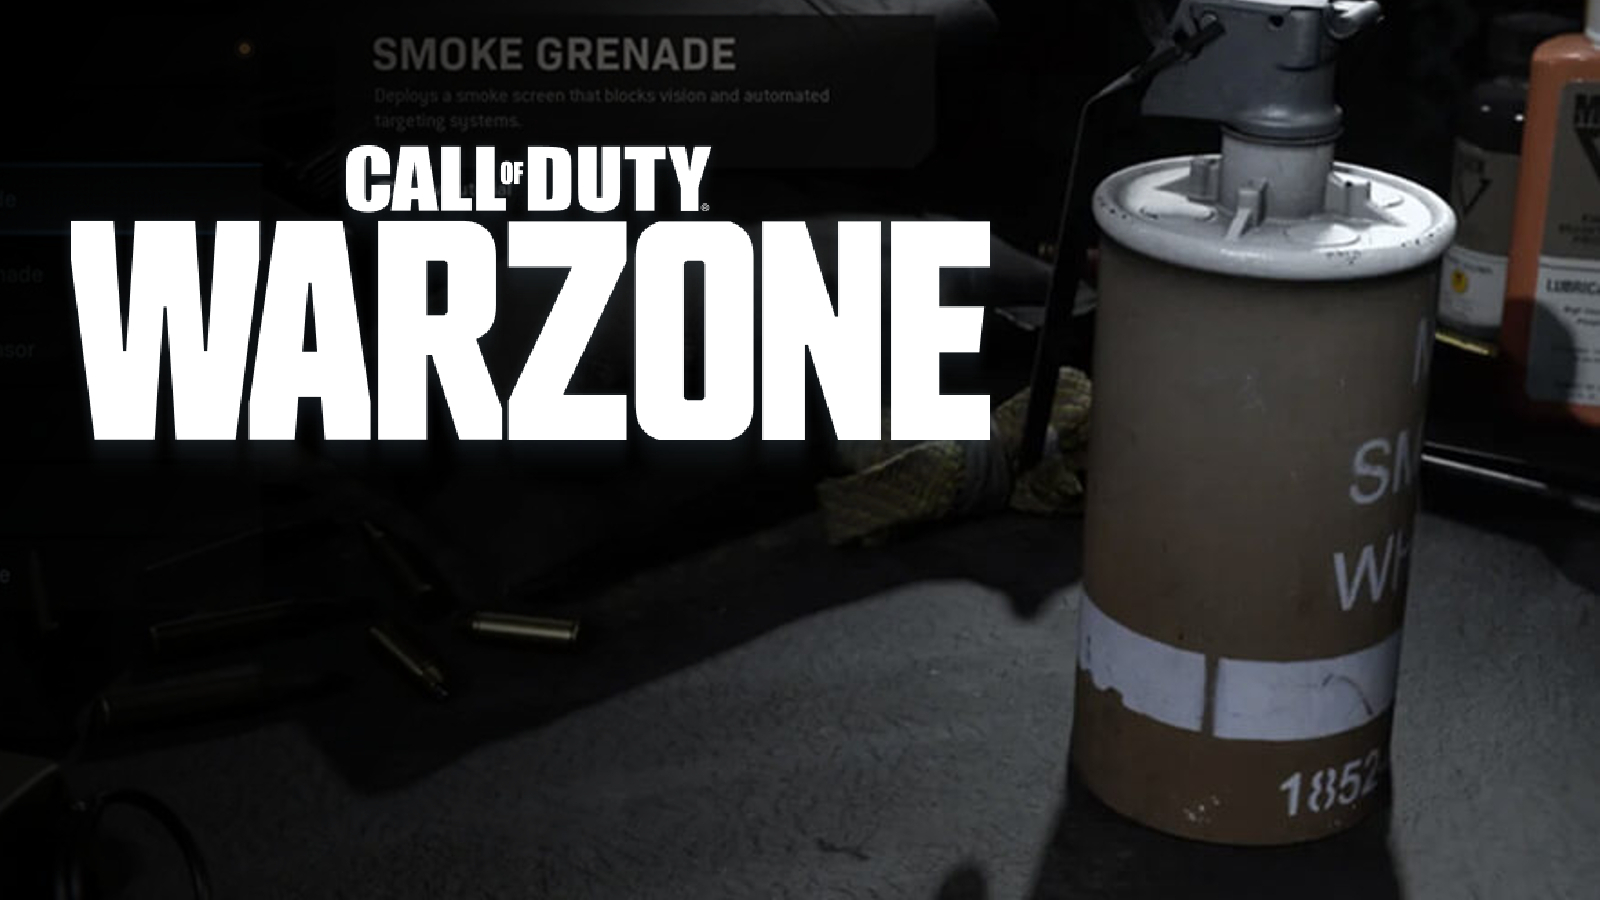 New Perks & INCENDIARY SMOKE GRENADE Added and now you can't see